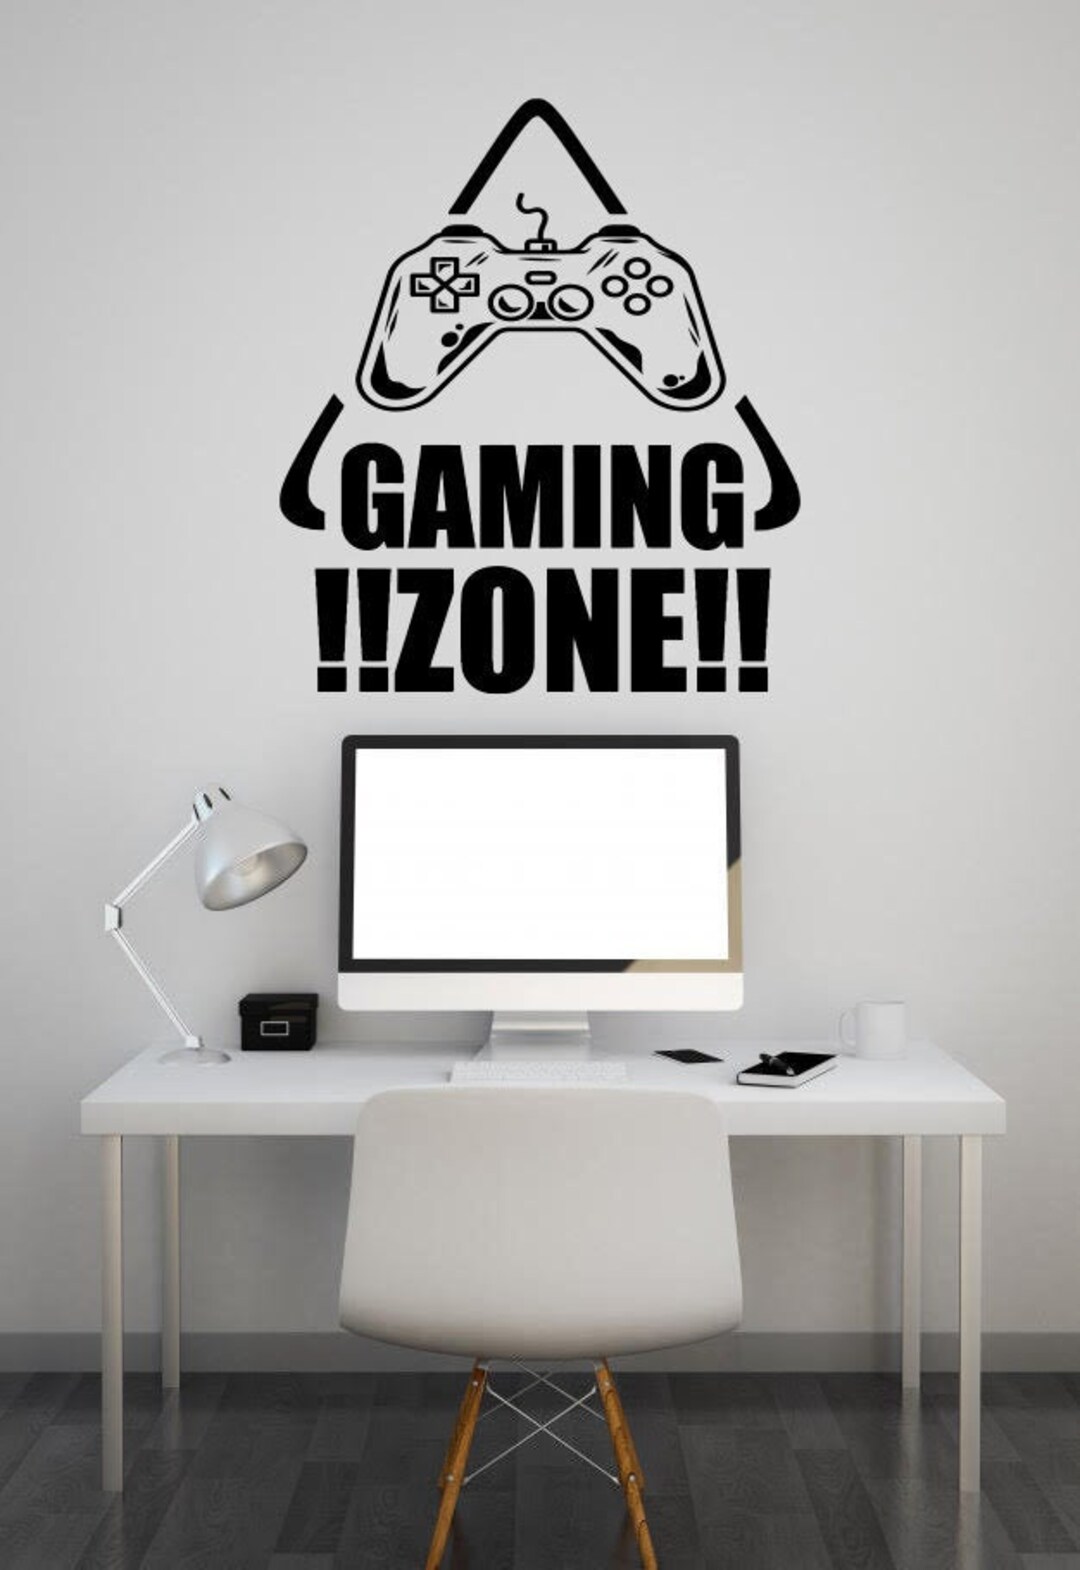  Vinyl Wall Decal Gaming Zone Gamer Phrase Chillout